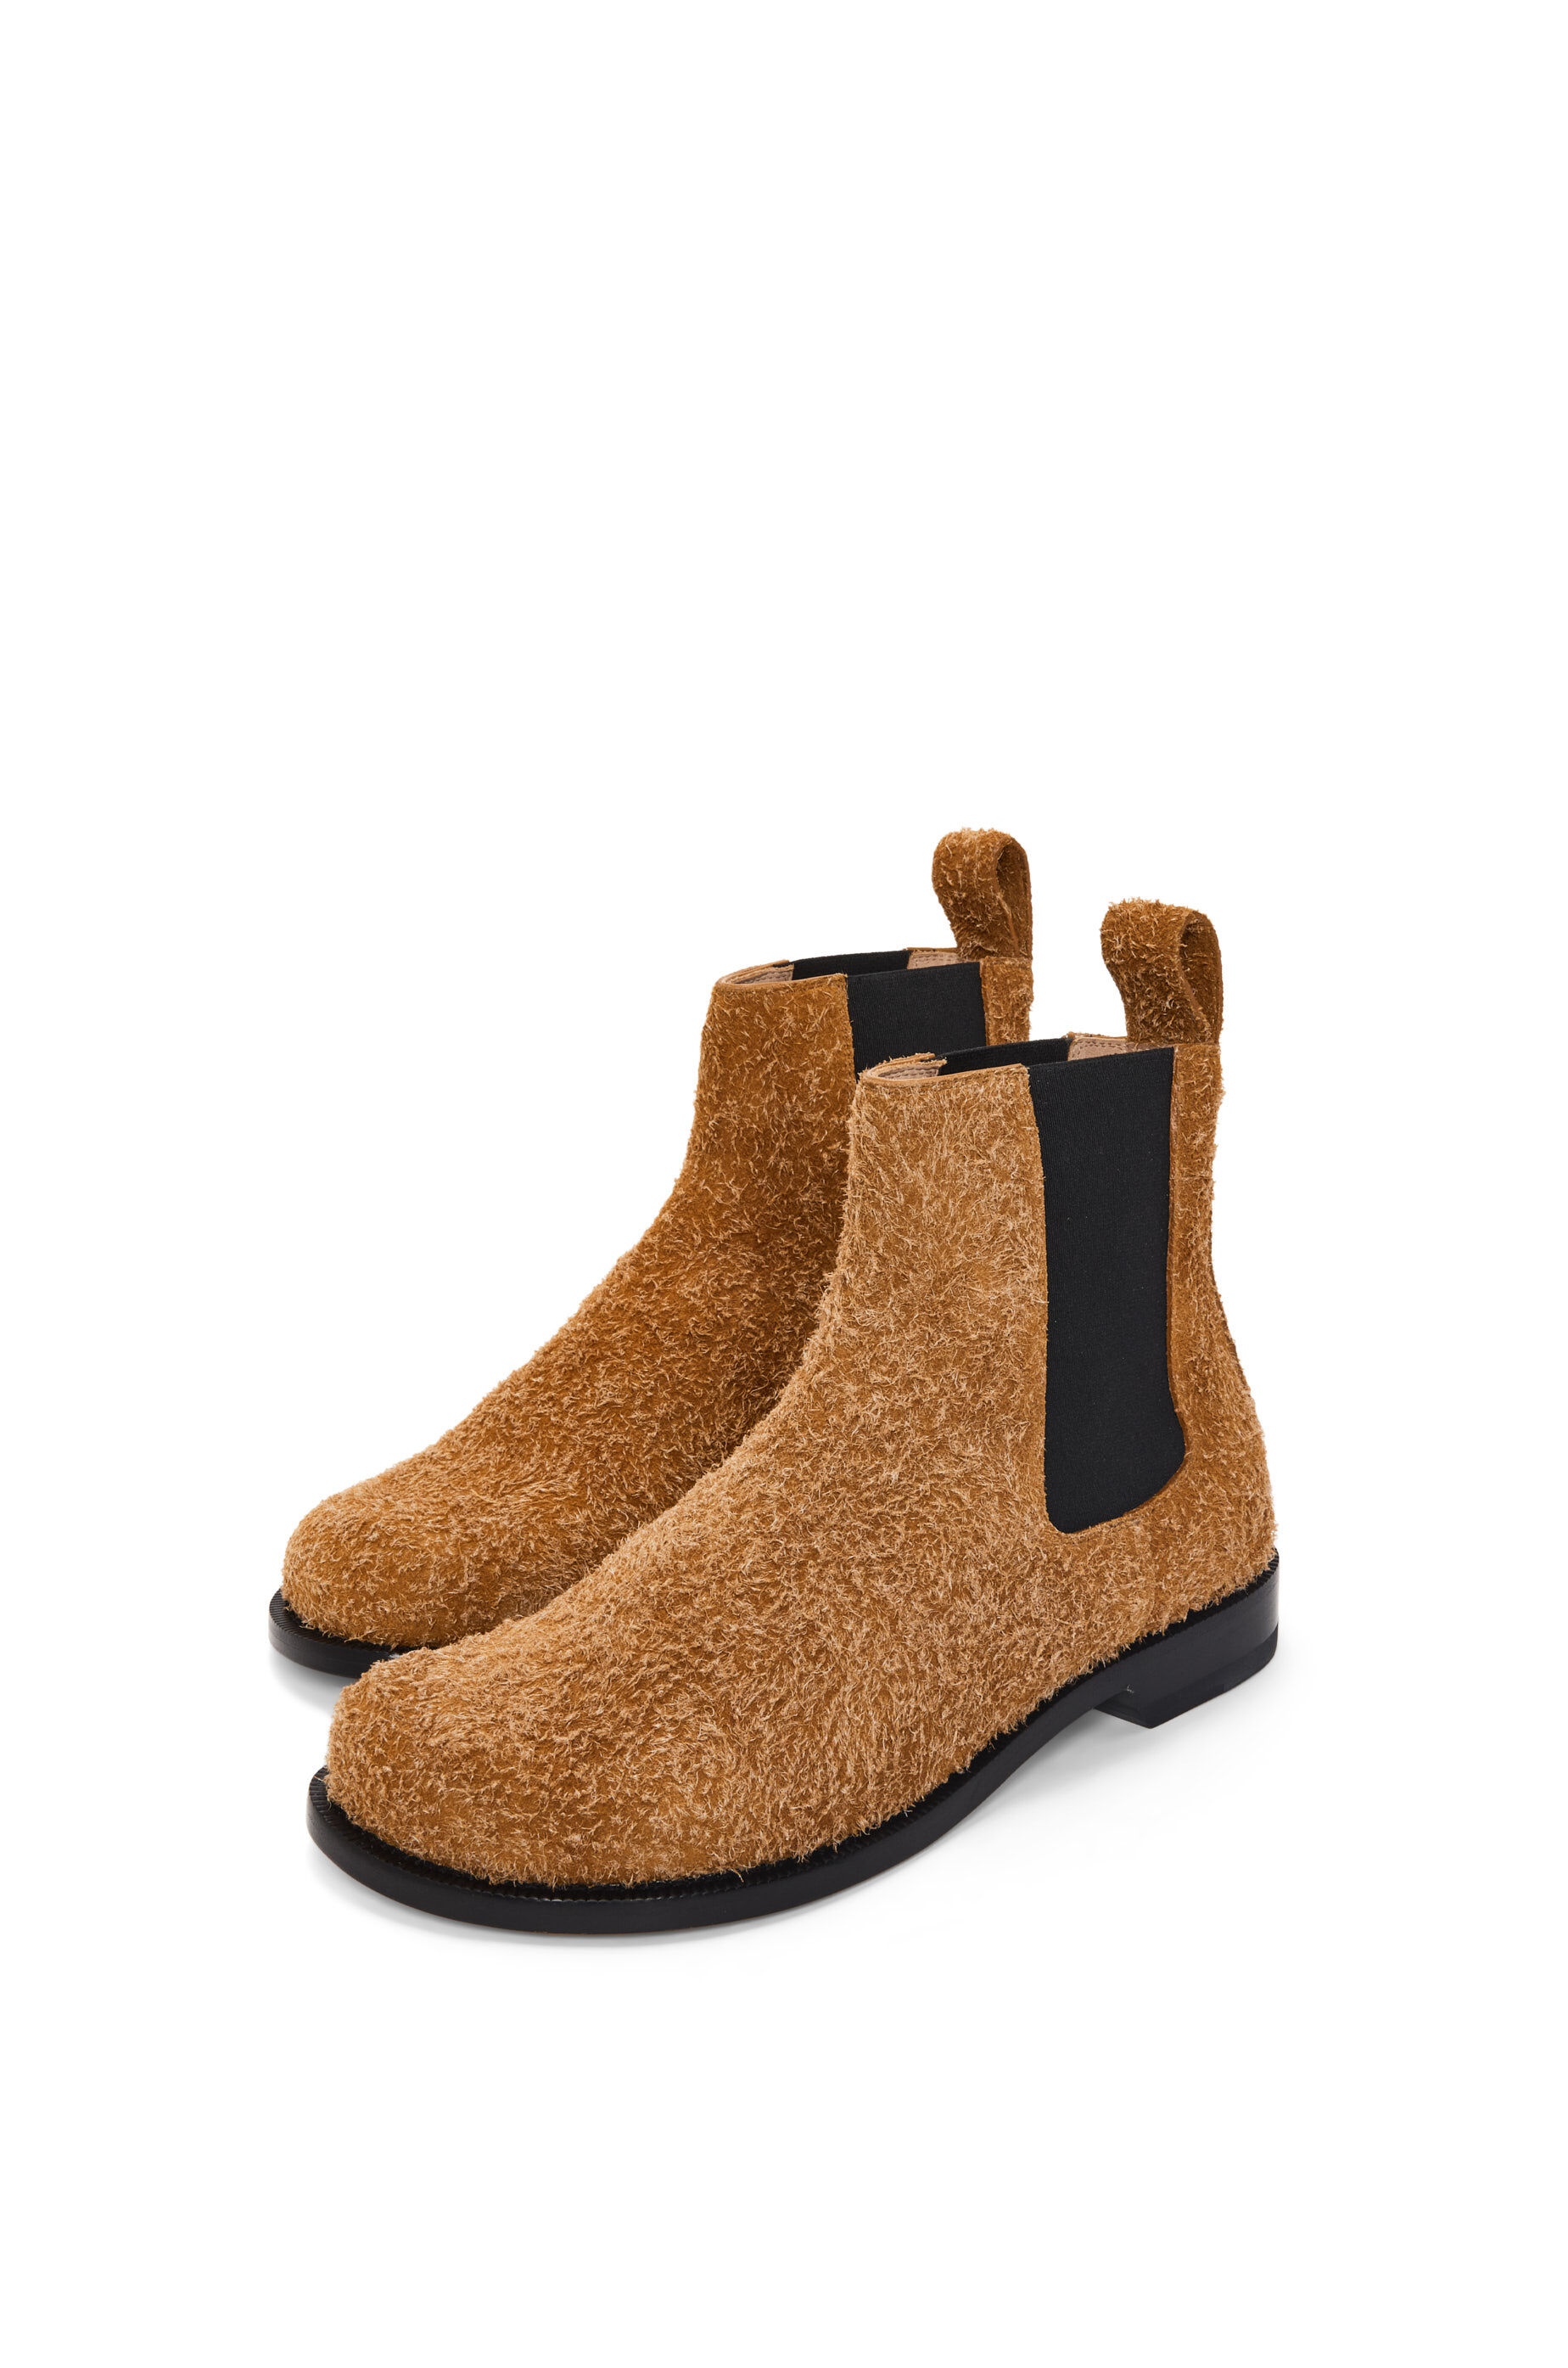 Campo chelsea boot in brushed suede - 2